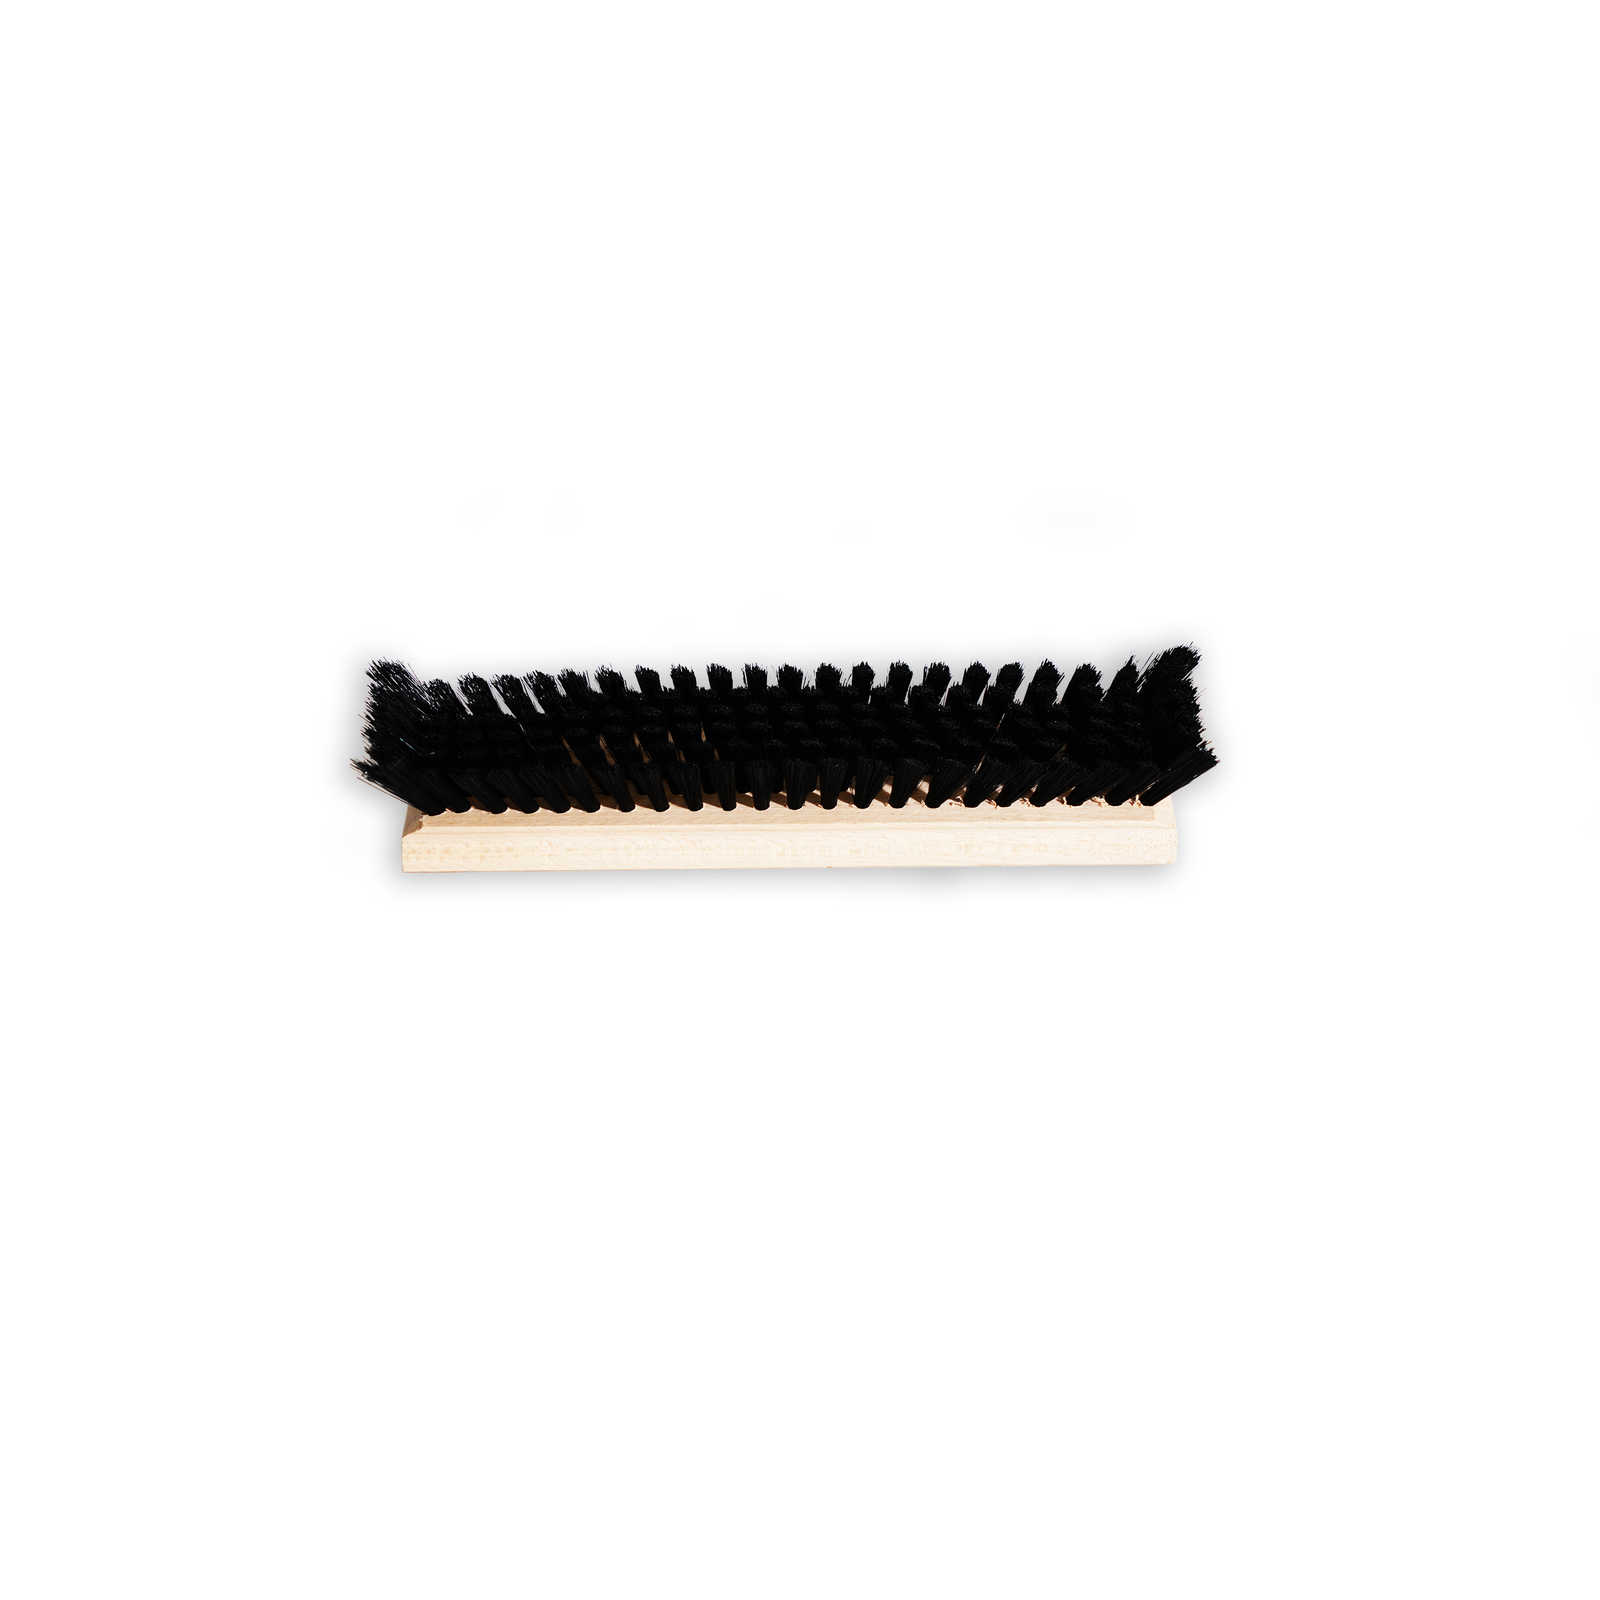         Wallpaper brush 23,5cm x 6cm wood with synthetic bristles
    